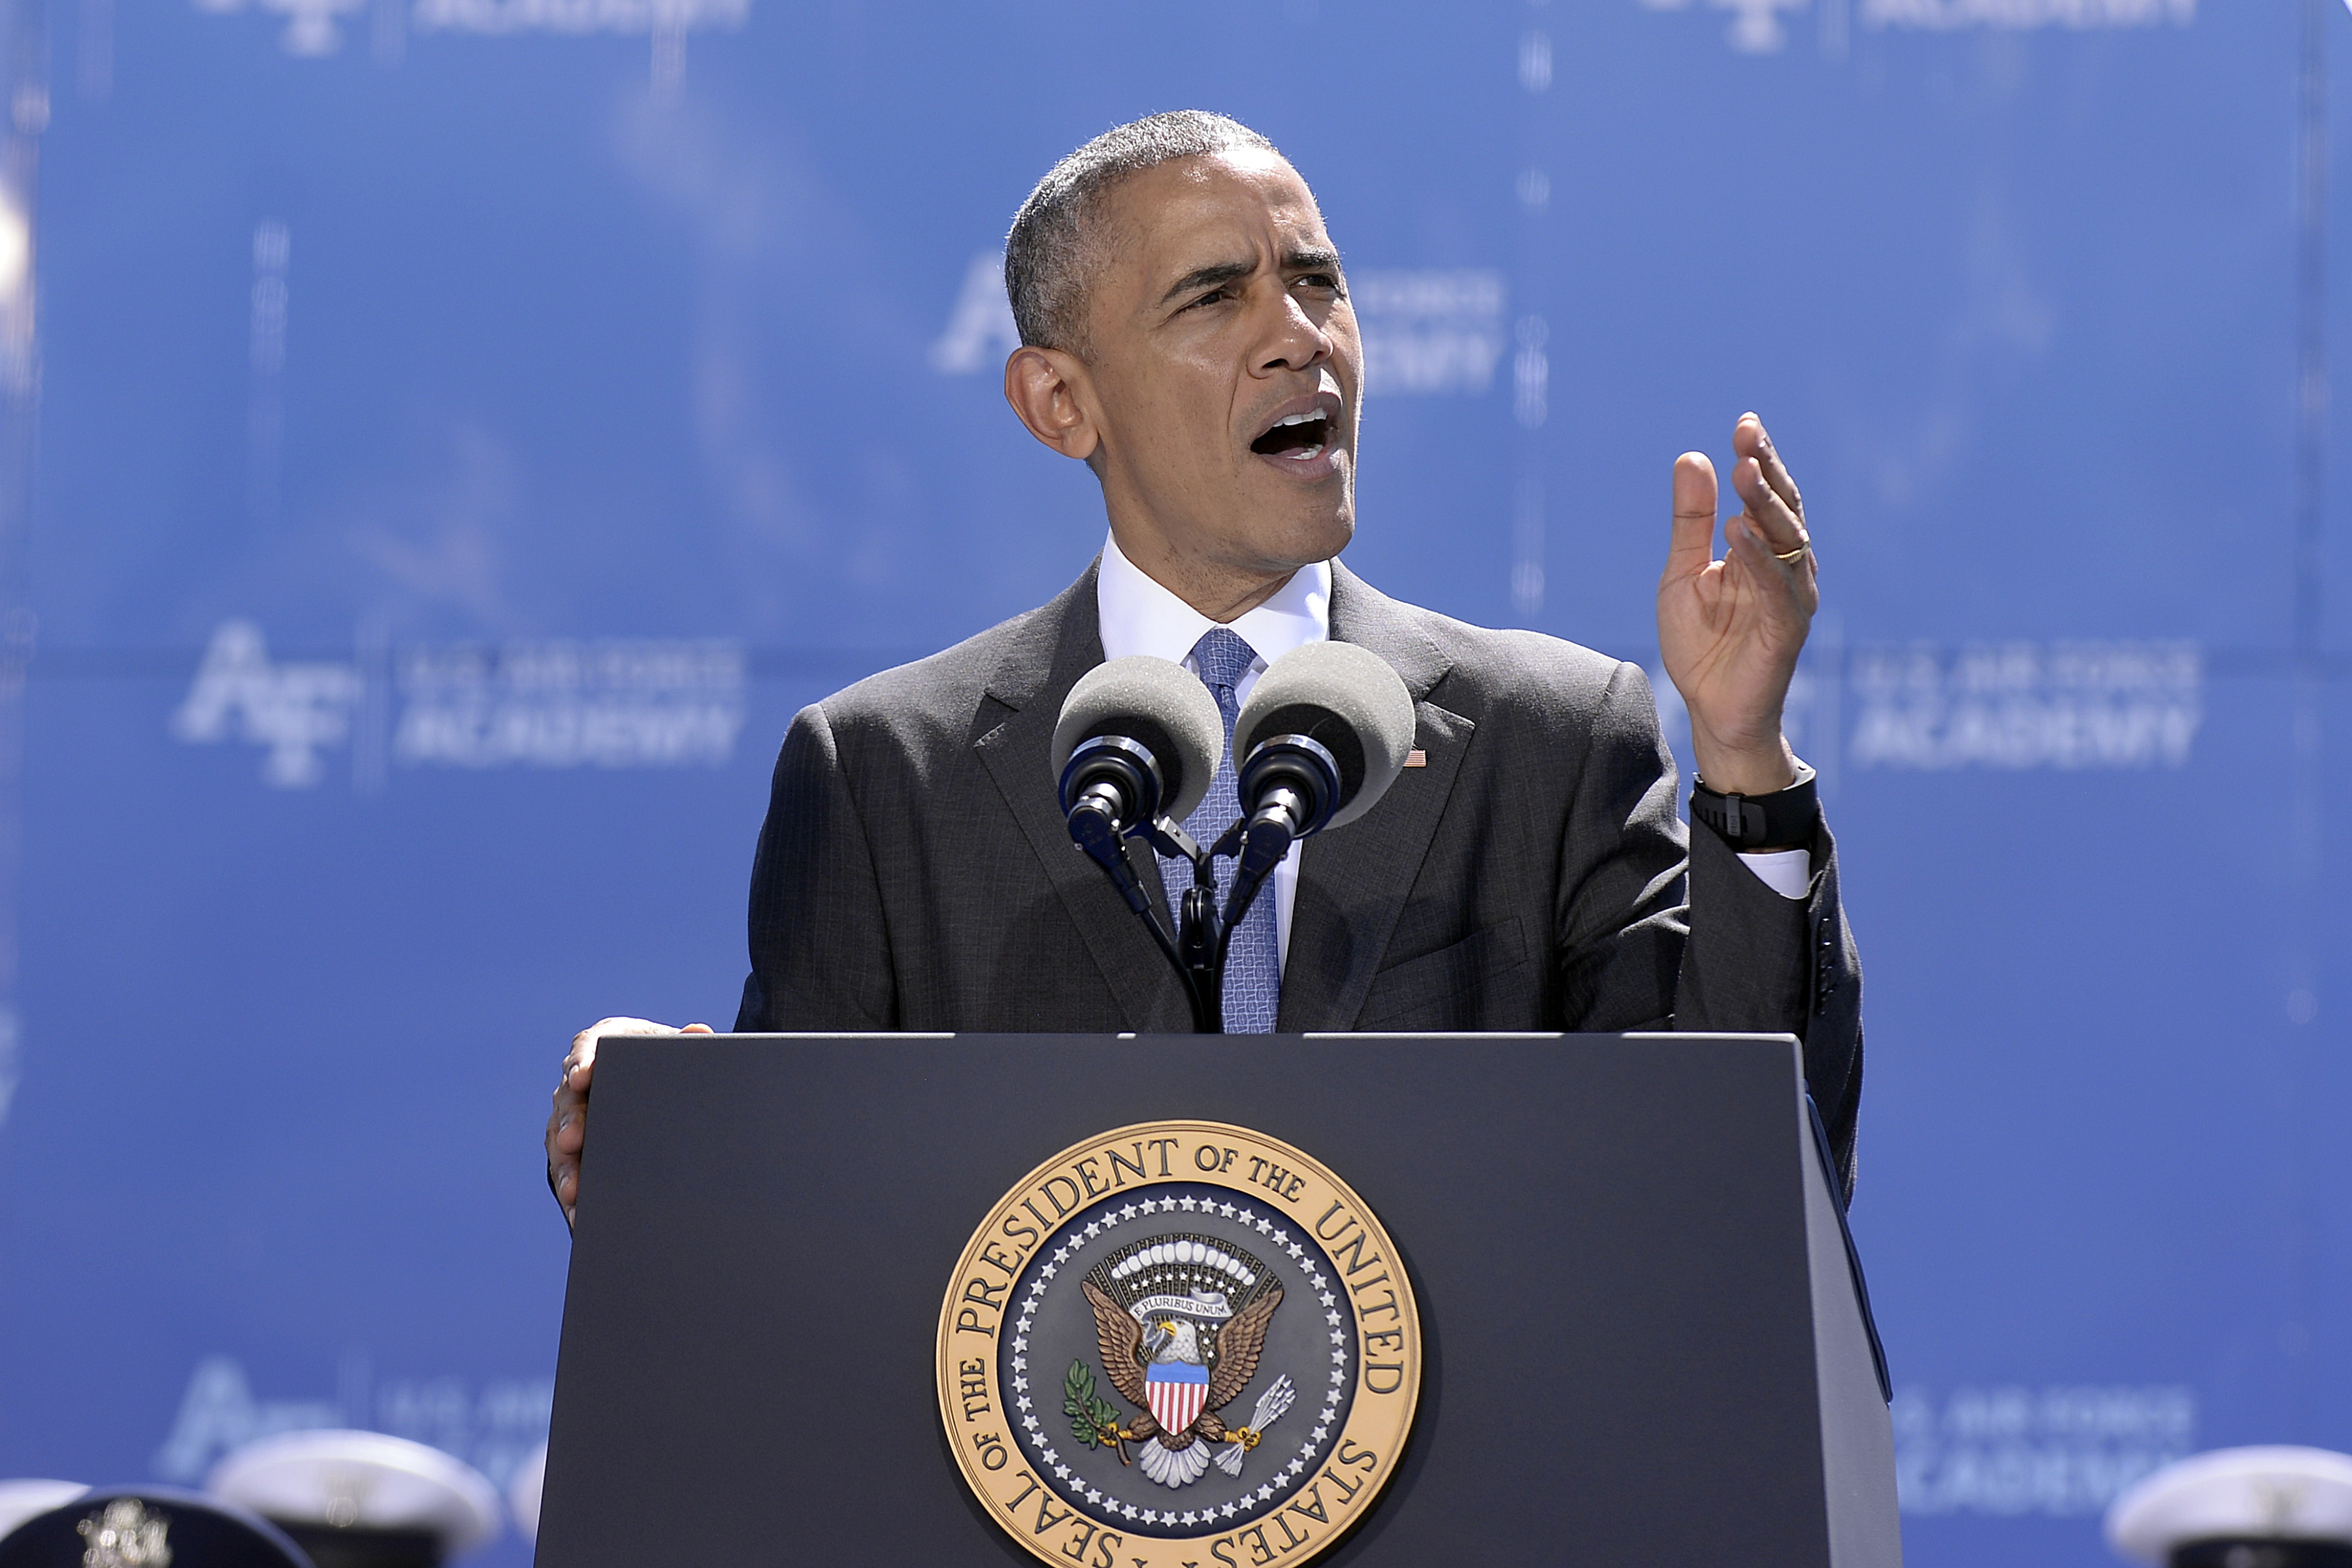 President Obama’s re-election carries climate mandate